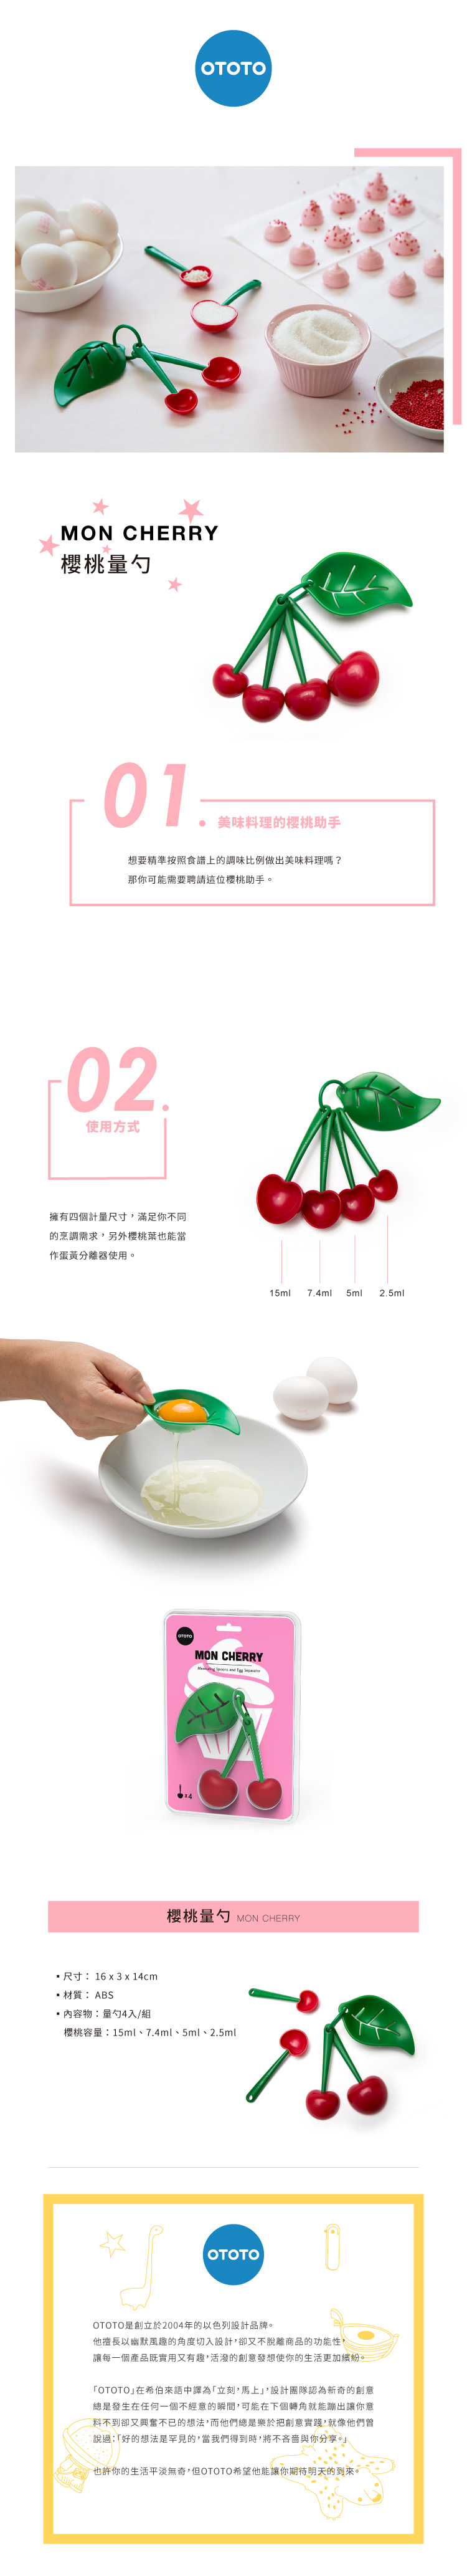 Mon Cherry Measuring Spoons and Egg Separator by Ototo 